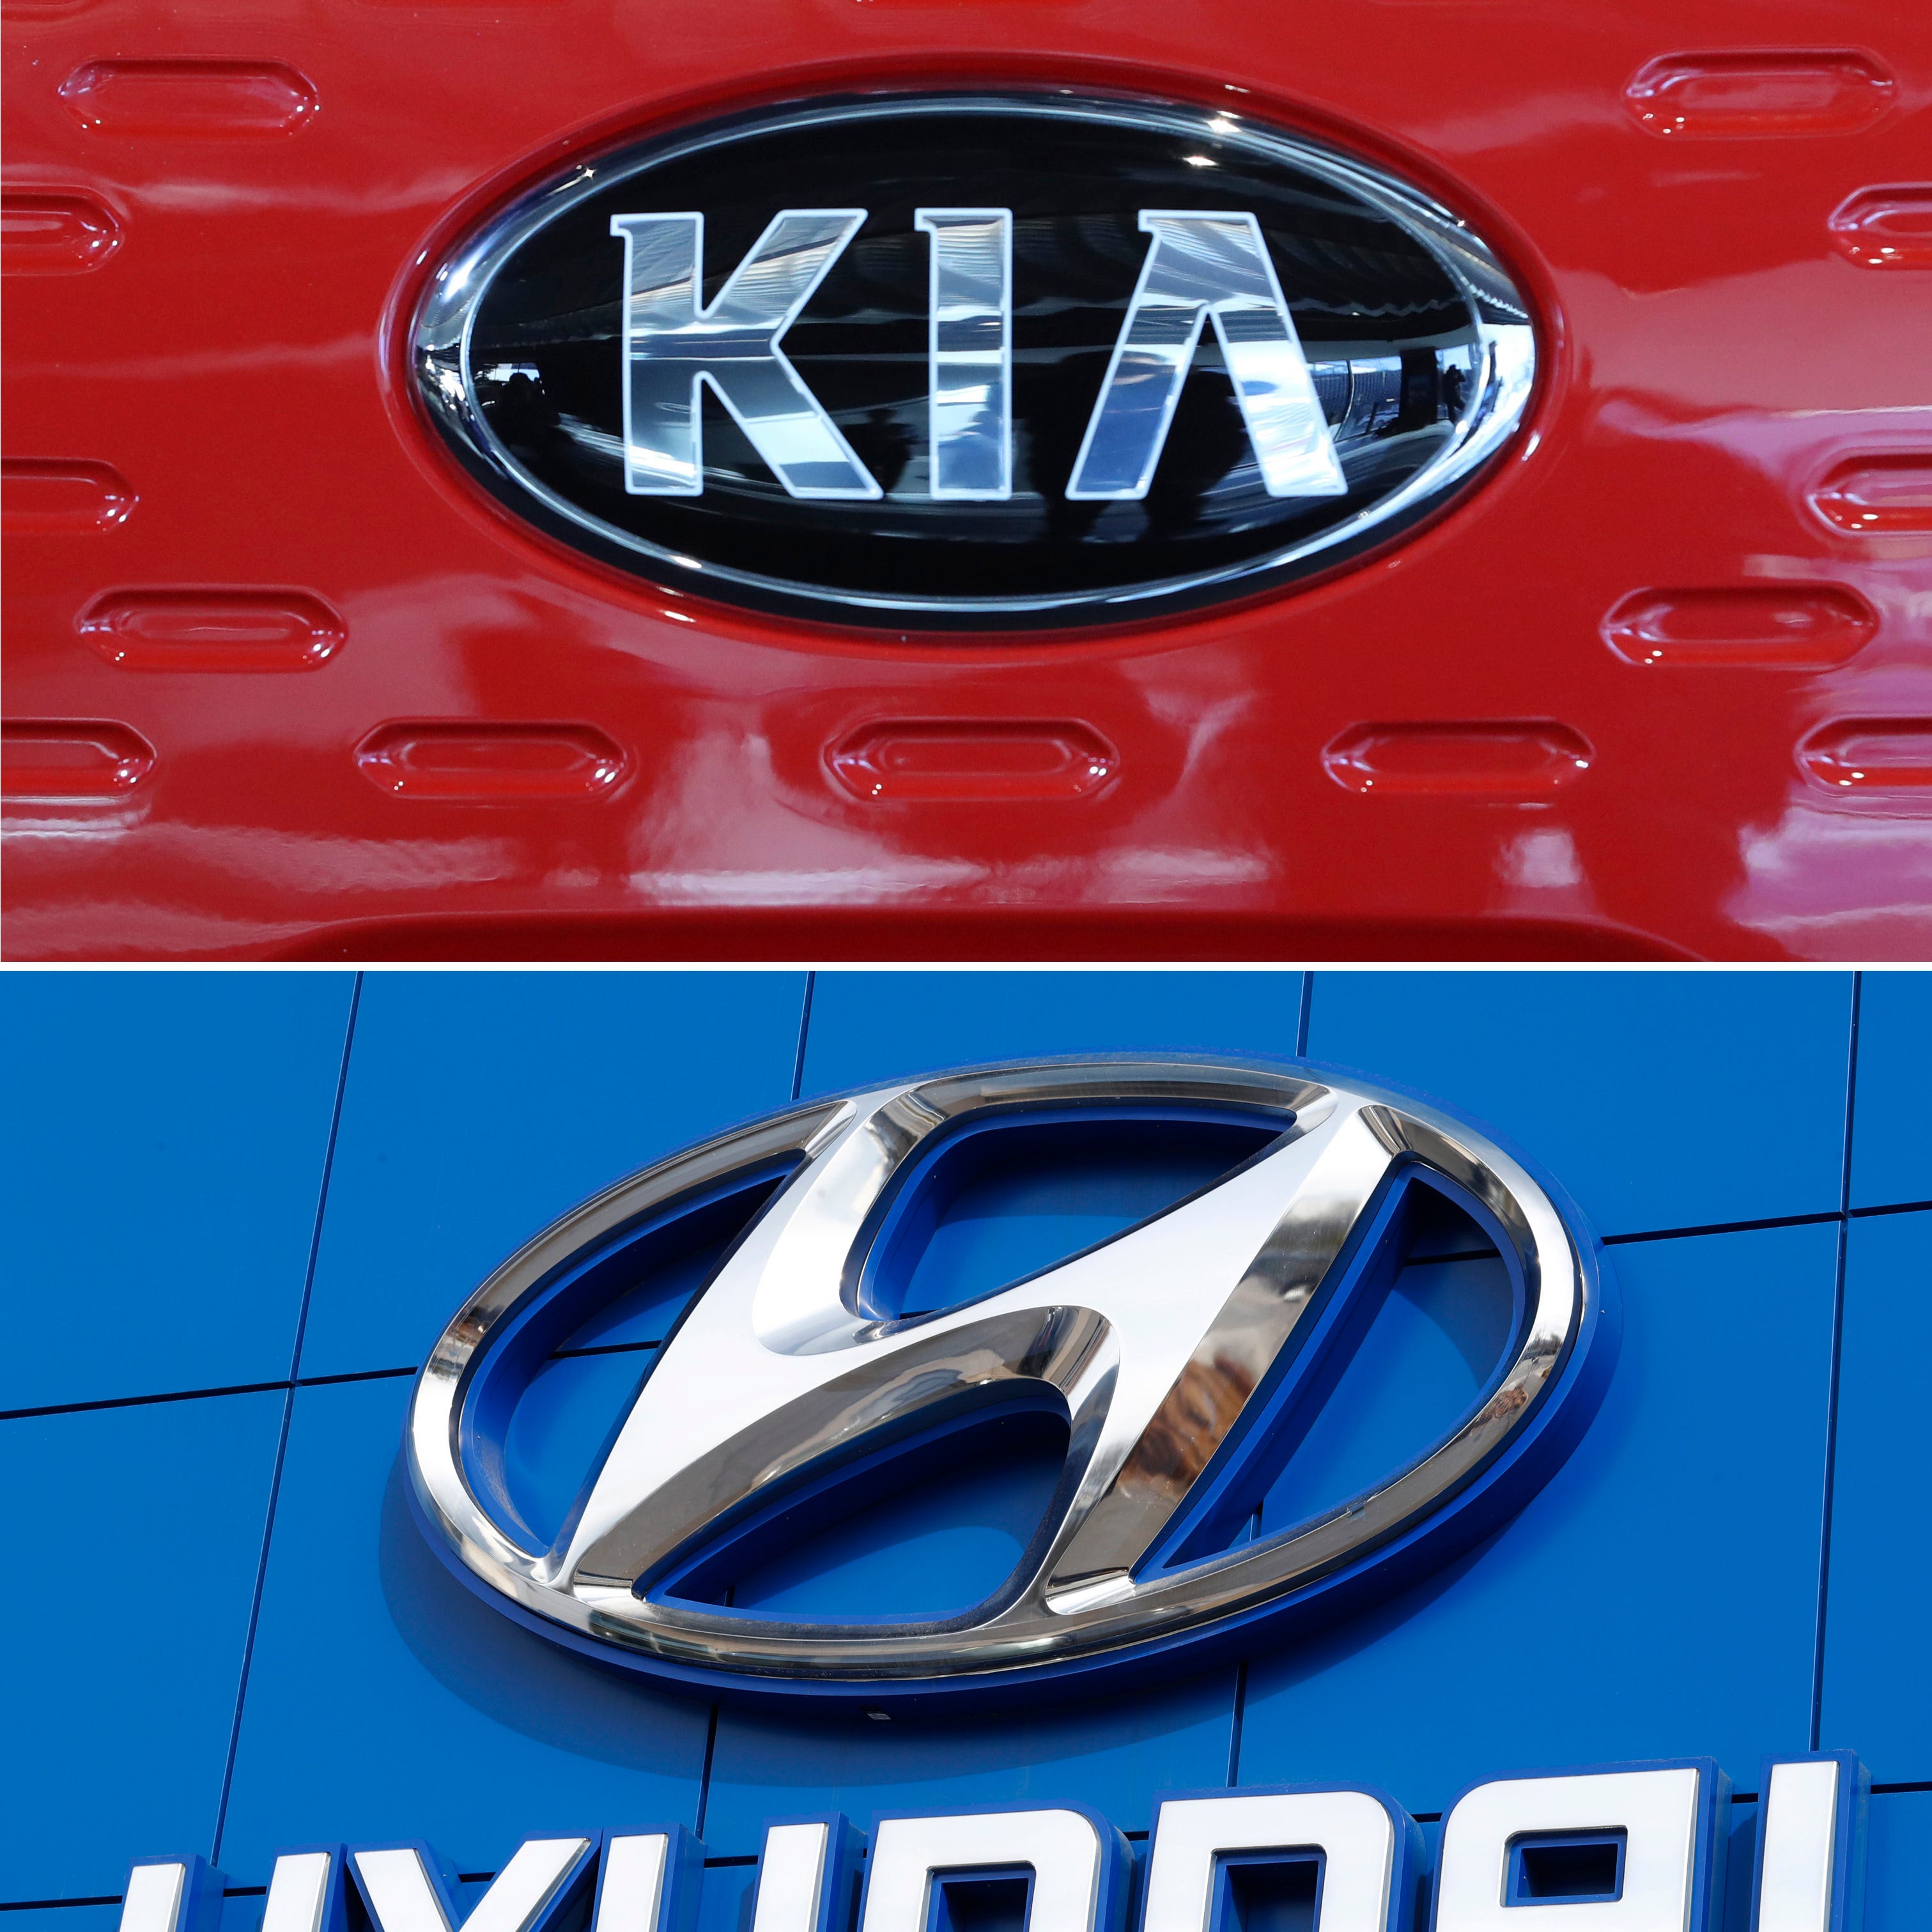 This combination of file photos shows the logo of Kia Motors, top and Hyundai logo, bottom.   Hyundai and Kia are recalling more than 550,000 cars and minivans in the U.S., Thursday, Sept. 30, 2021,  because the turn signals can flash in the opposite direction of what the driver intended. The recall covers Hyundai's Sonata midsize car from the 2015 through 2015 model years, and Sonata gas-electric hybrids from 2016 and 2017. Kia's Sedona minivan from 2015 through 2017 also is affected.